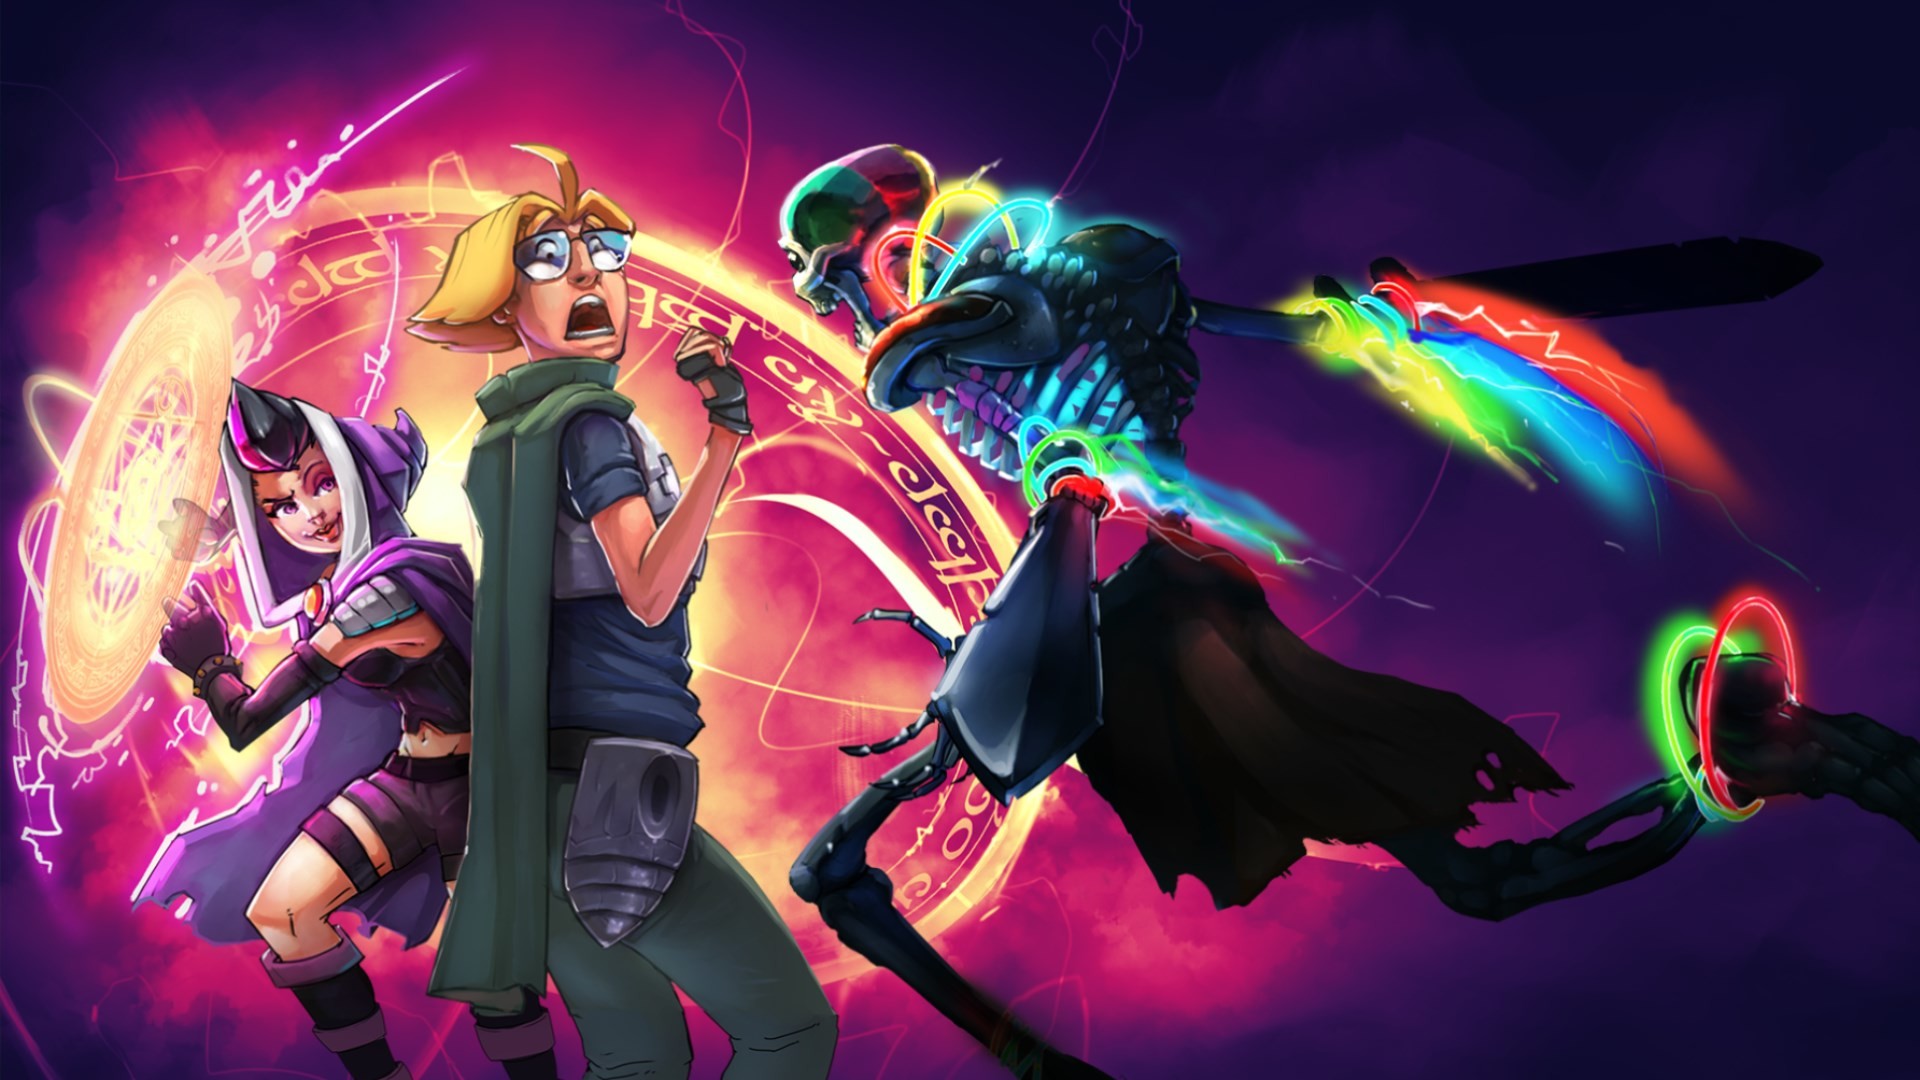 download the last version for mac The Metronomicon